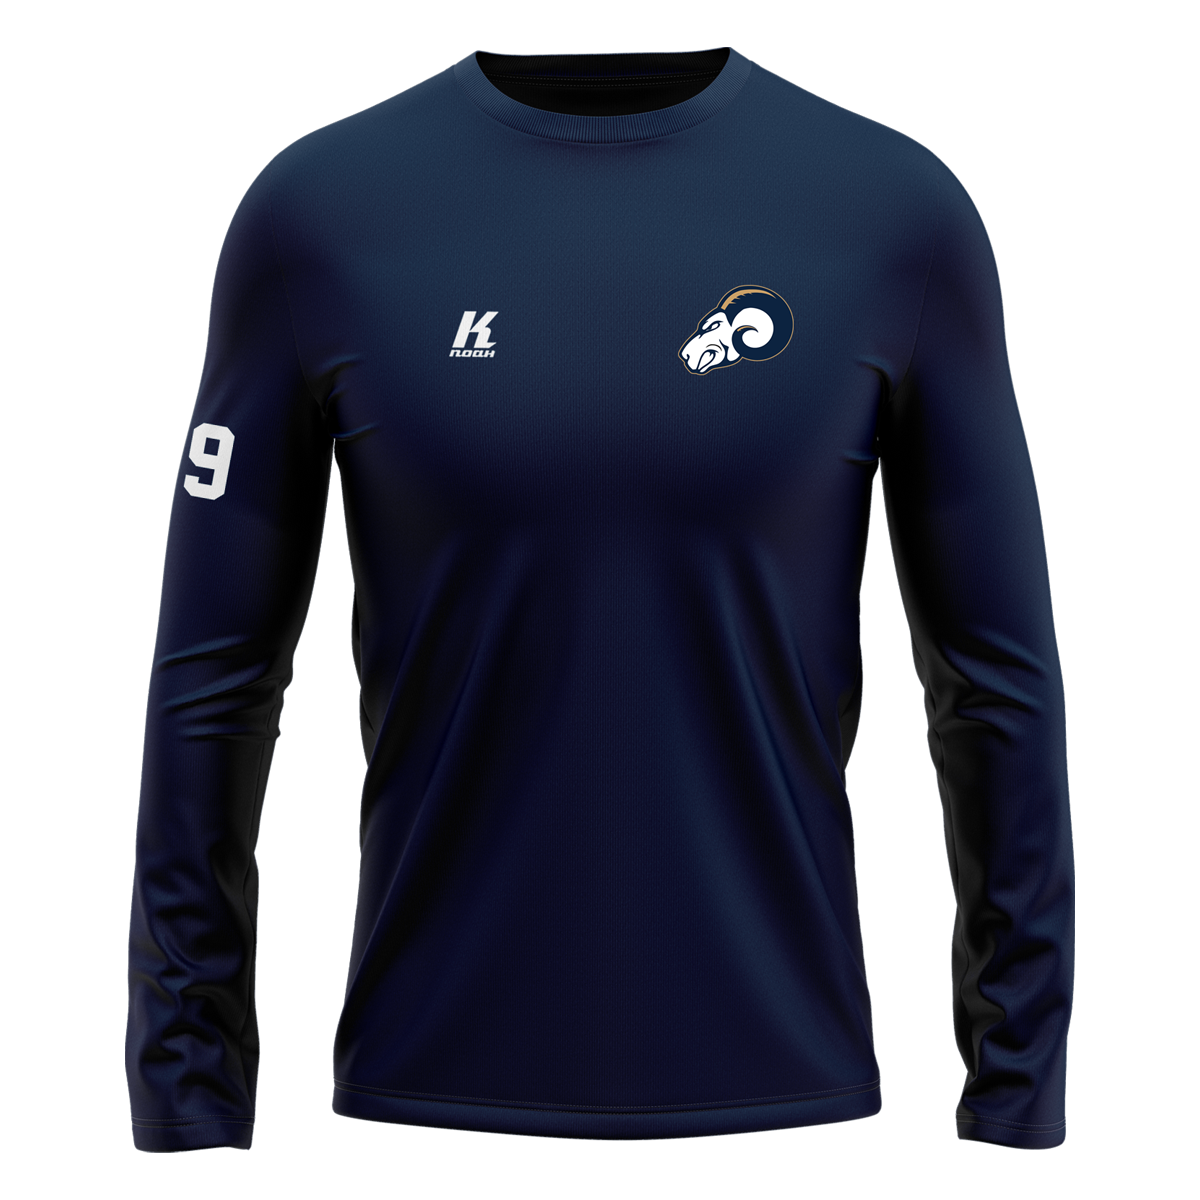 Rams Basic Longsleeve Tee Primary Navy with Playernumber/Initials